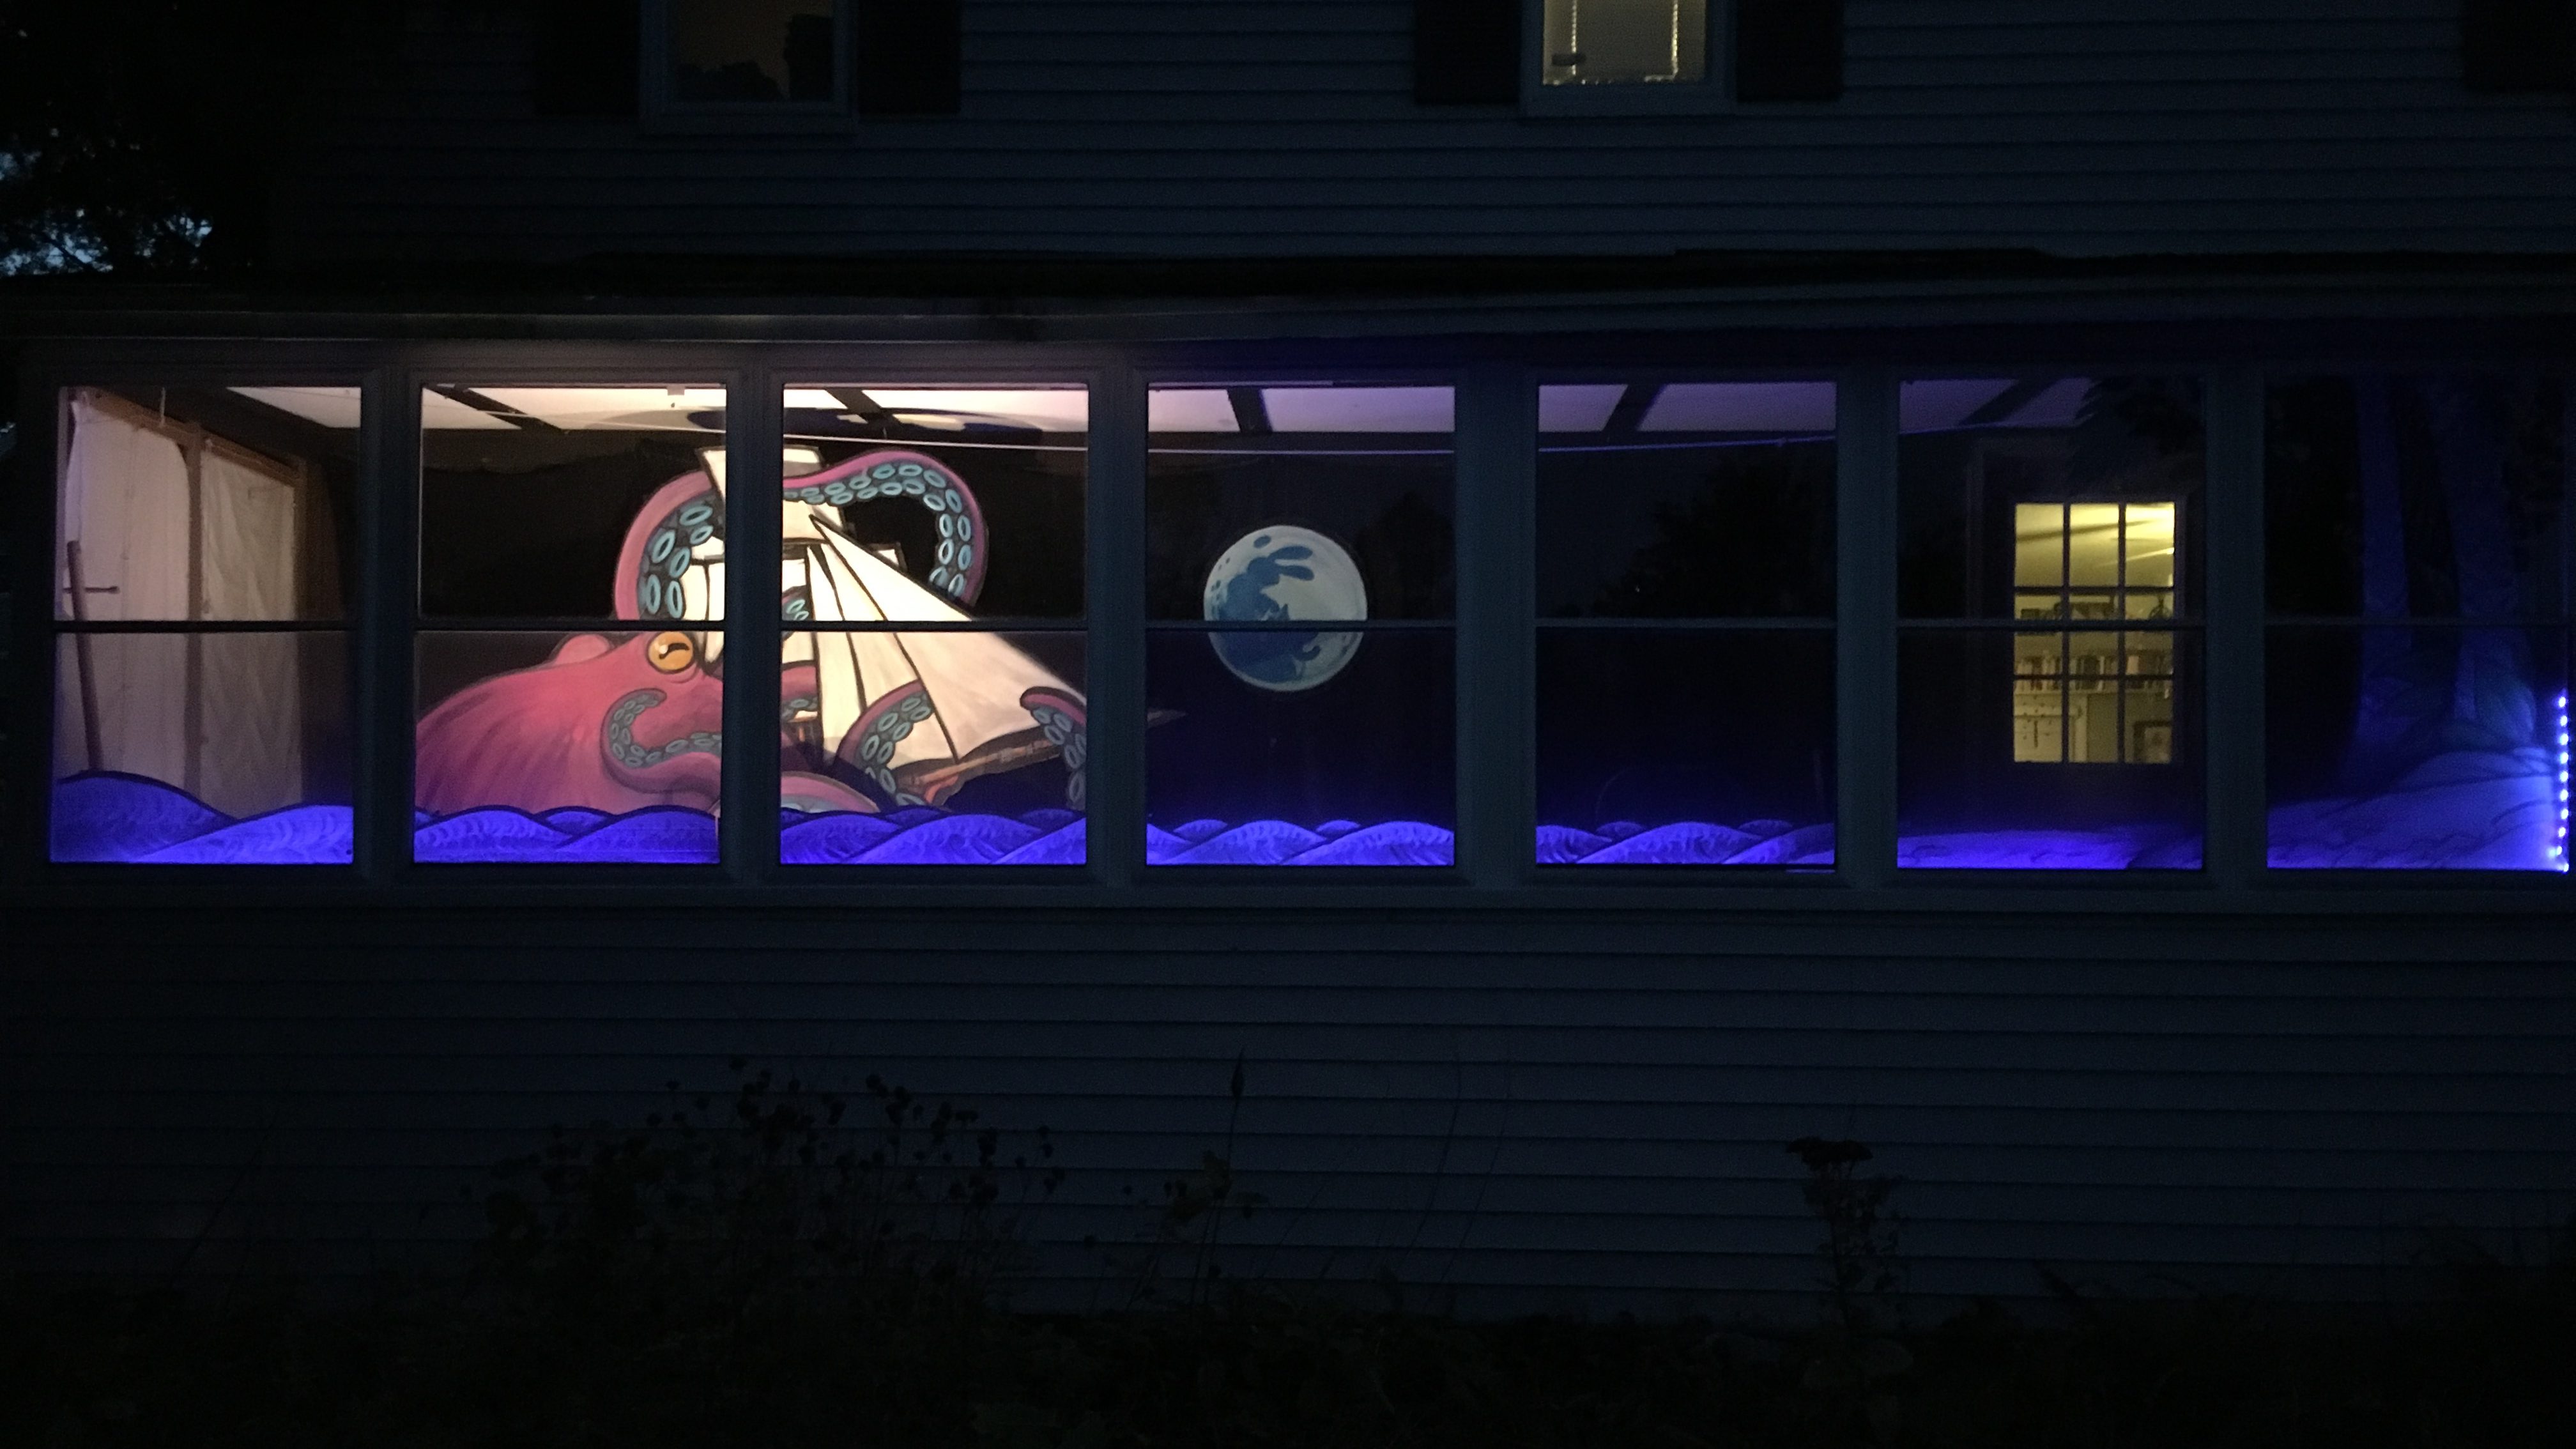 porch window with the full moon rising over the sea, a pirate ship, and a giant octopus attacking the ship